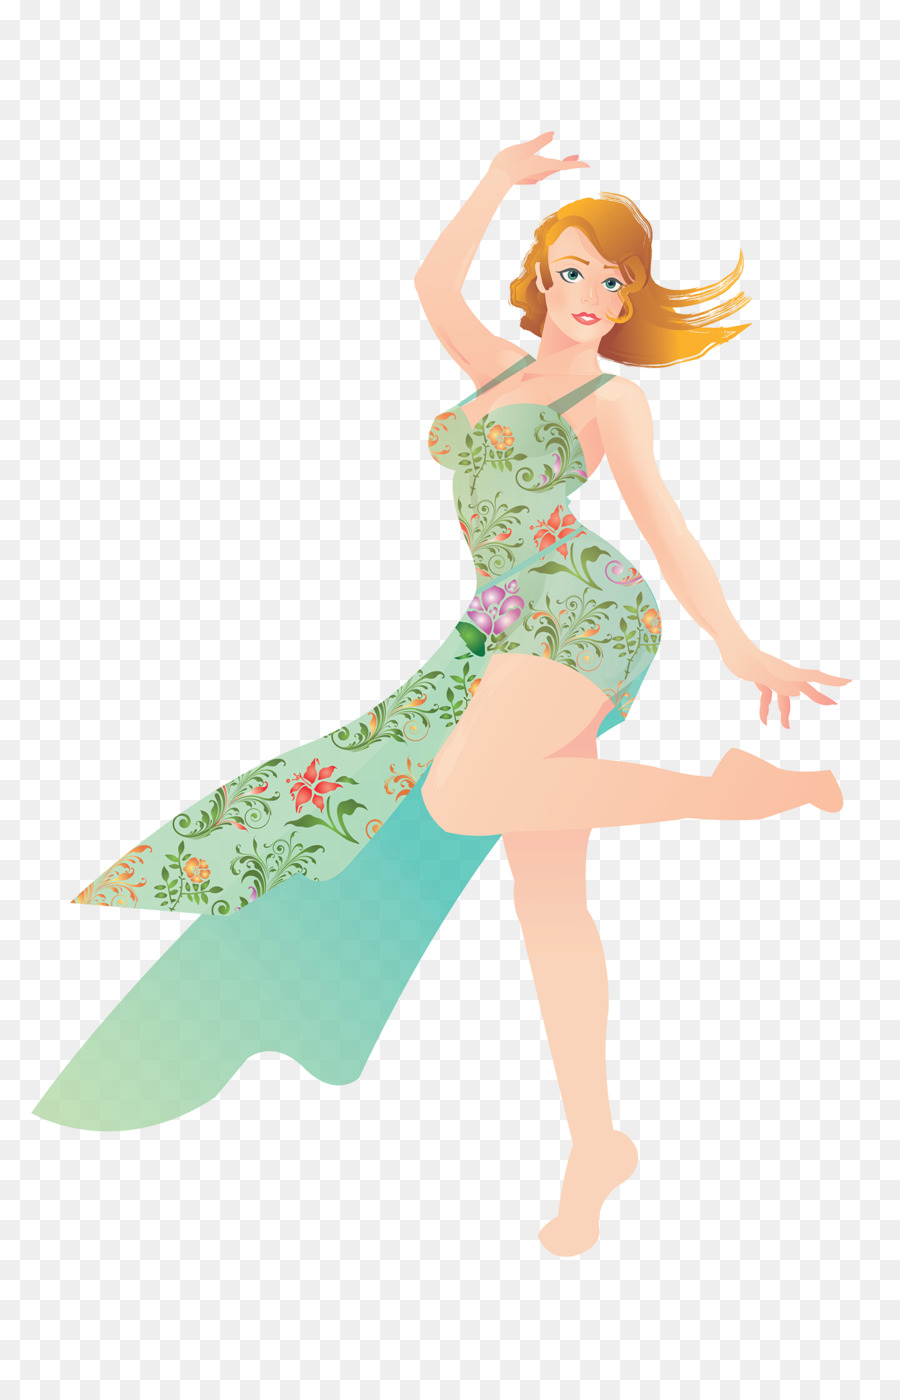 Pin-up girl Illustration Fairy Barbie Fashion - bolillo pattern png download - 1400*2164 - Free Transparent Pinup Girl png Download.